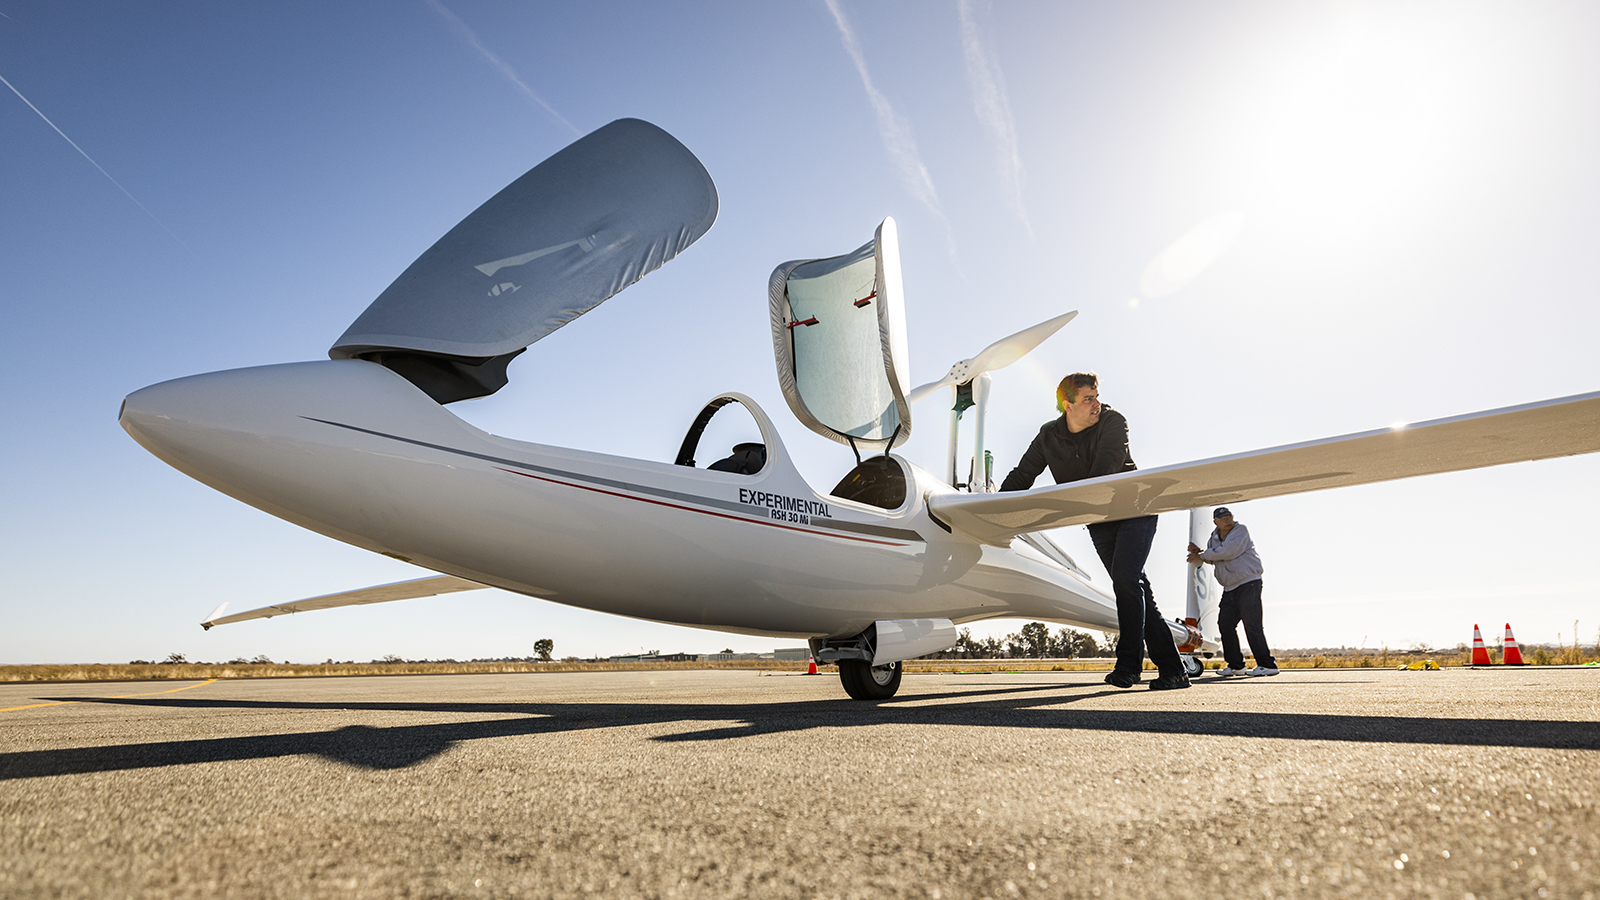 Professor Paulo Iscold pushes a lightweight experimental aircraft onto a tarmac for a test flight.